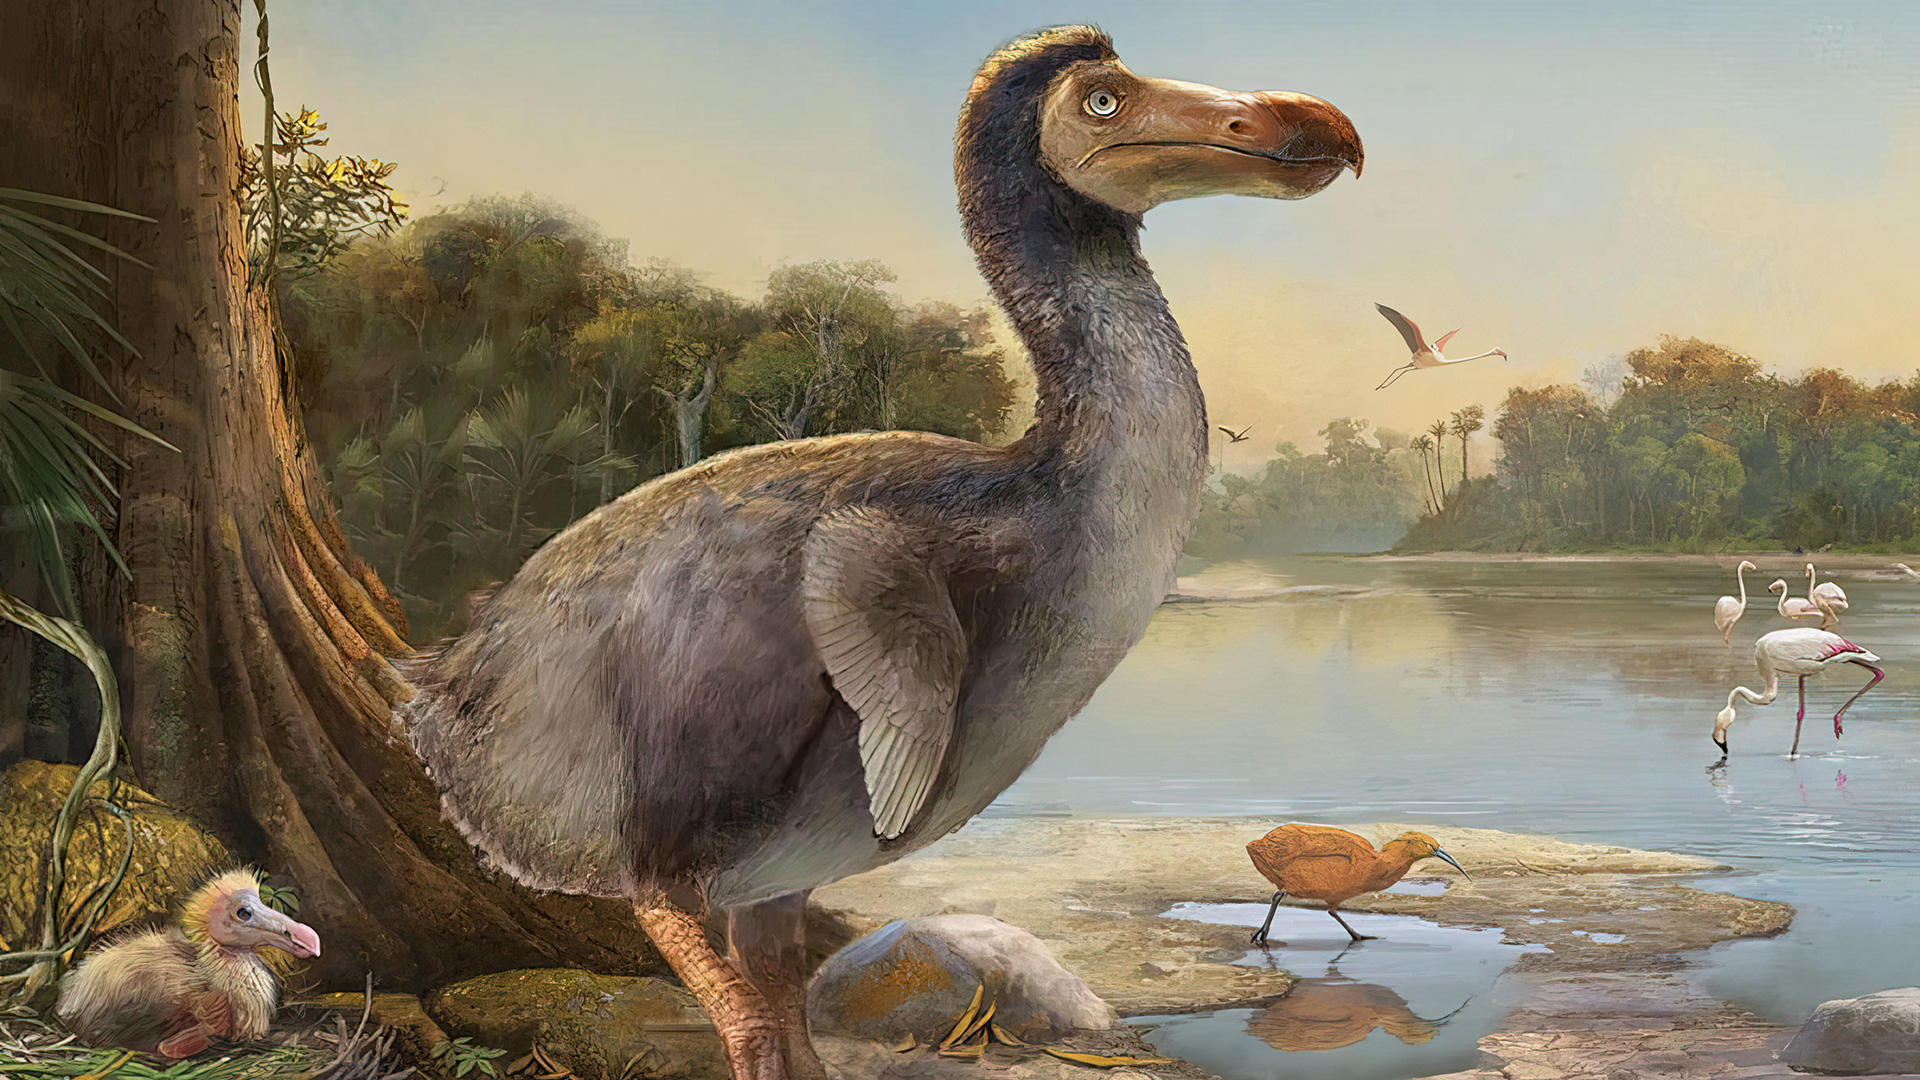 The Dodo Bird: A De-Extinction Challenge to Humanity's Perception of Utility